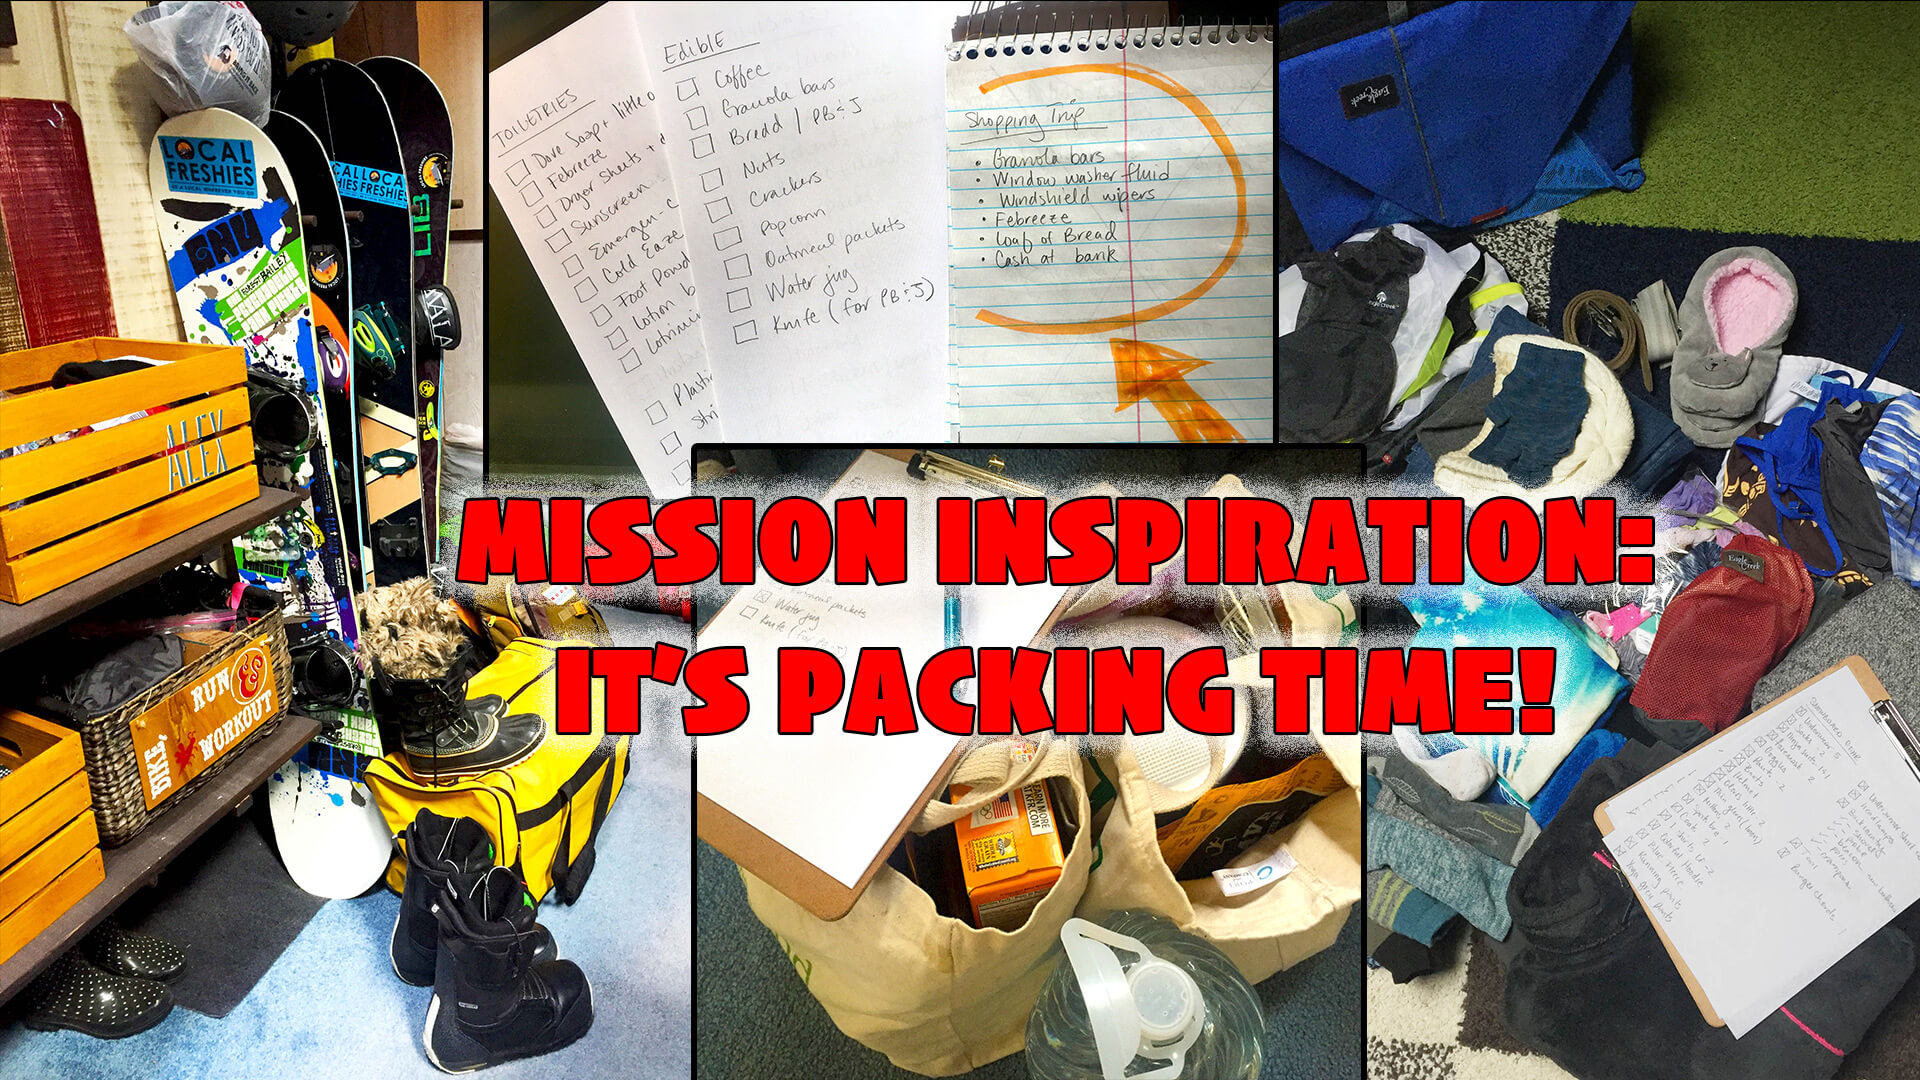 “Mission Inspiration” – Part 2: Road Trip Packing Time!